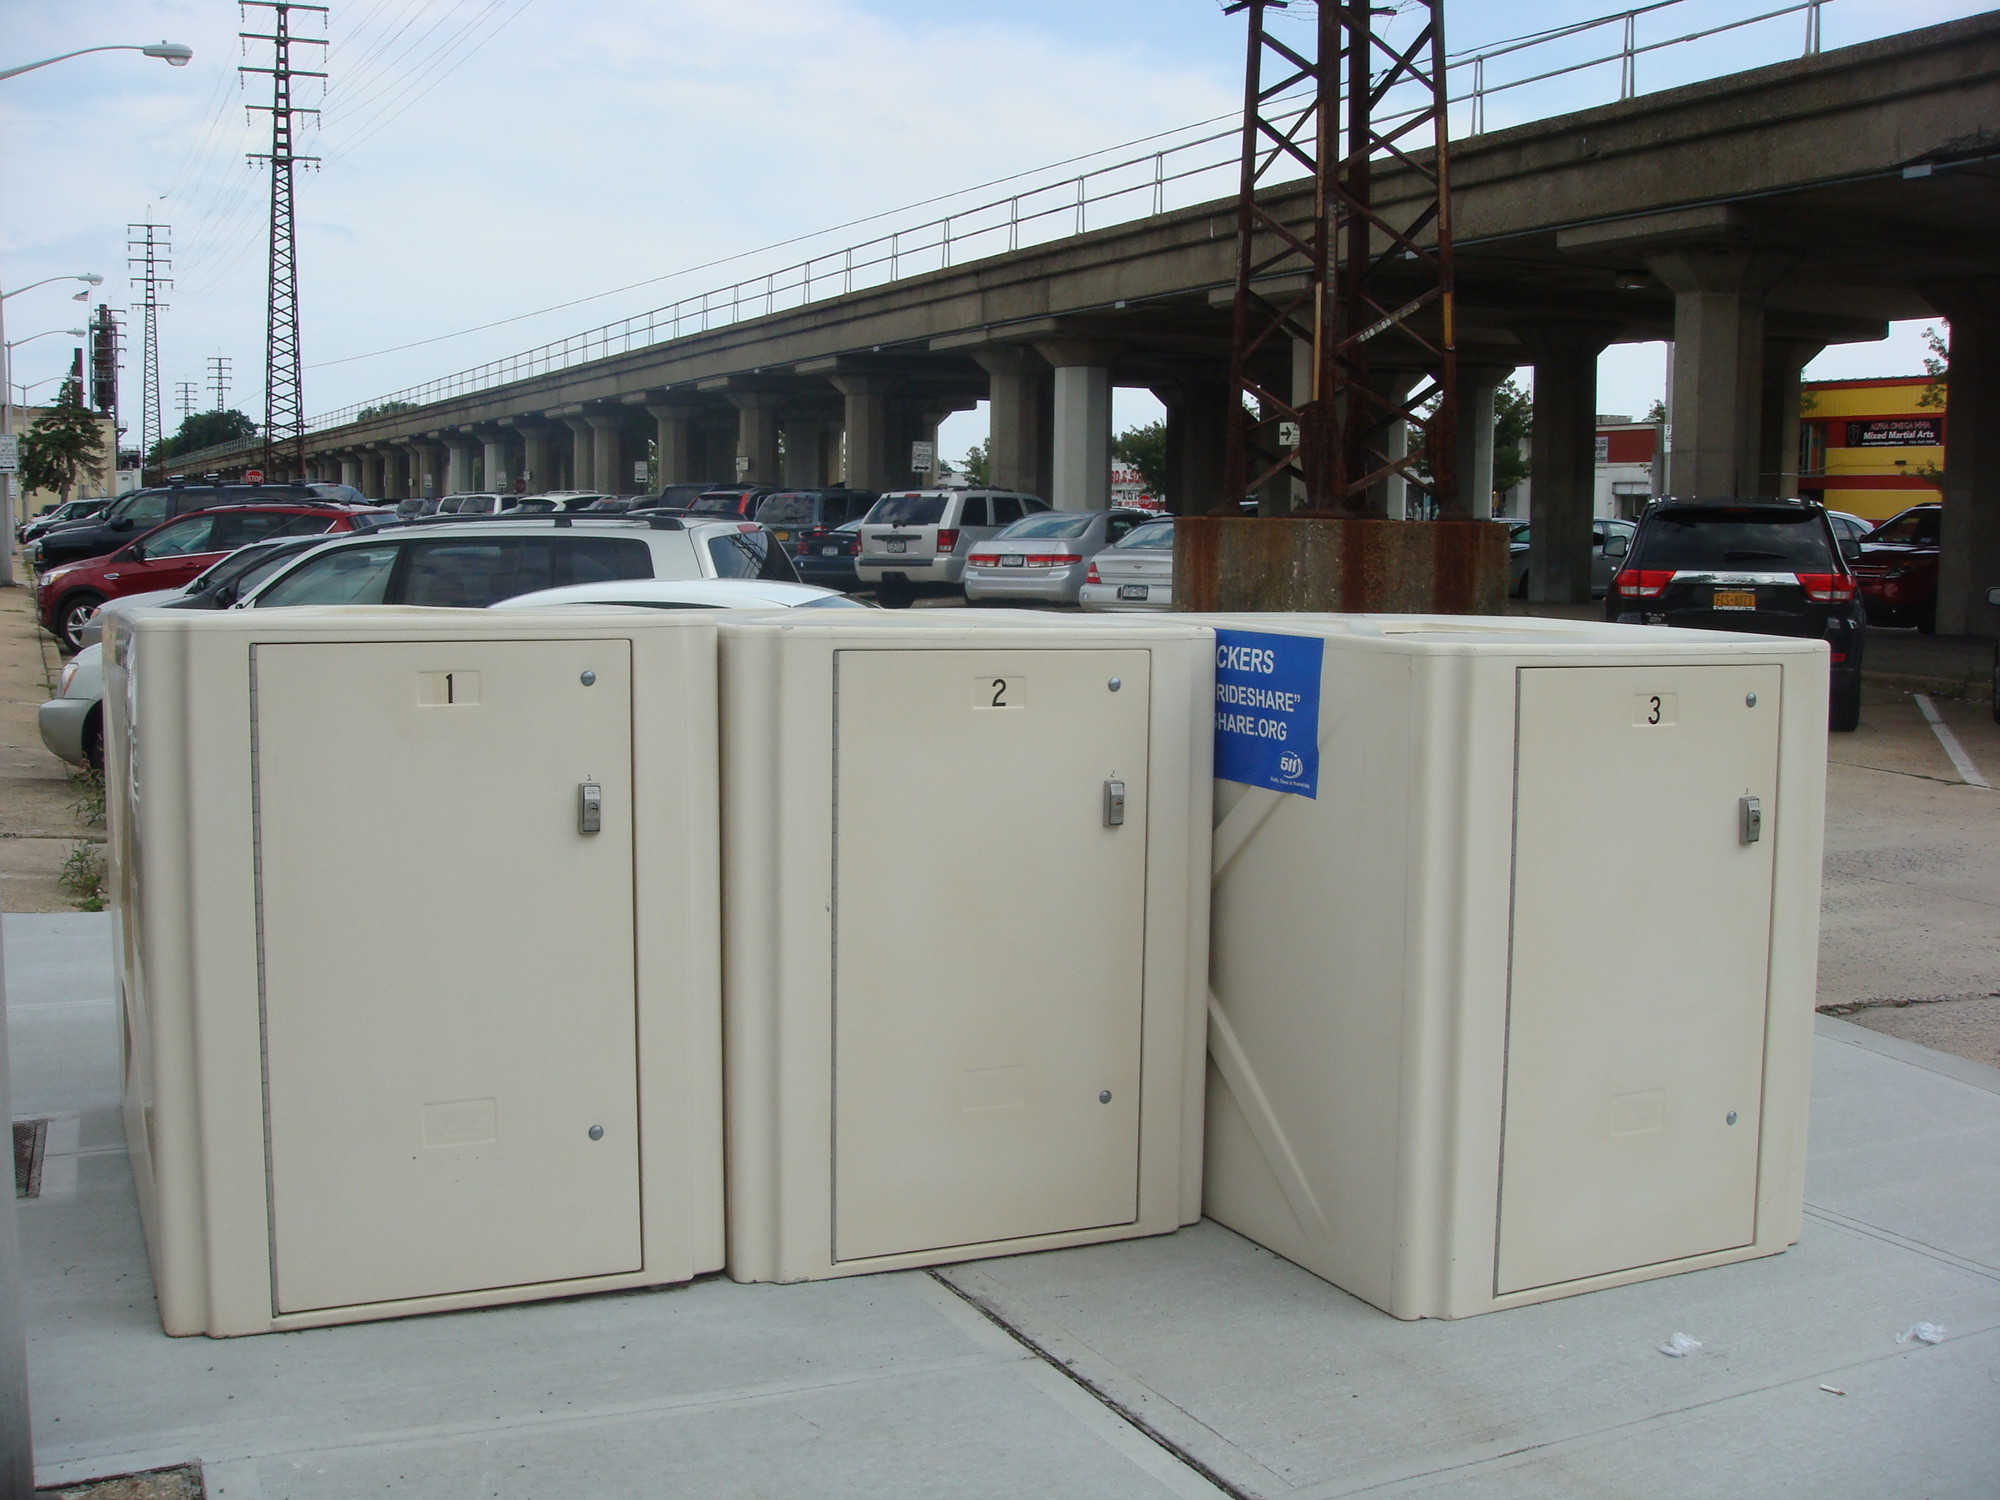 The new bike lockers at Parking Field 5 will be able to be rented for a year.